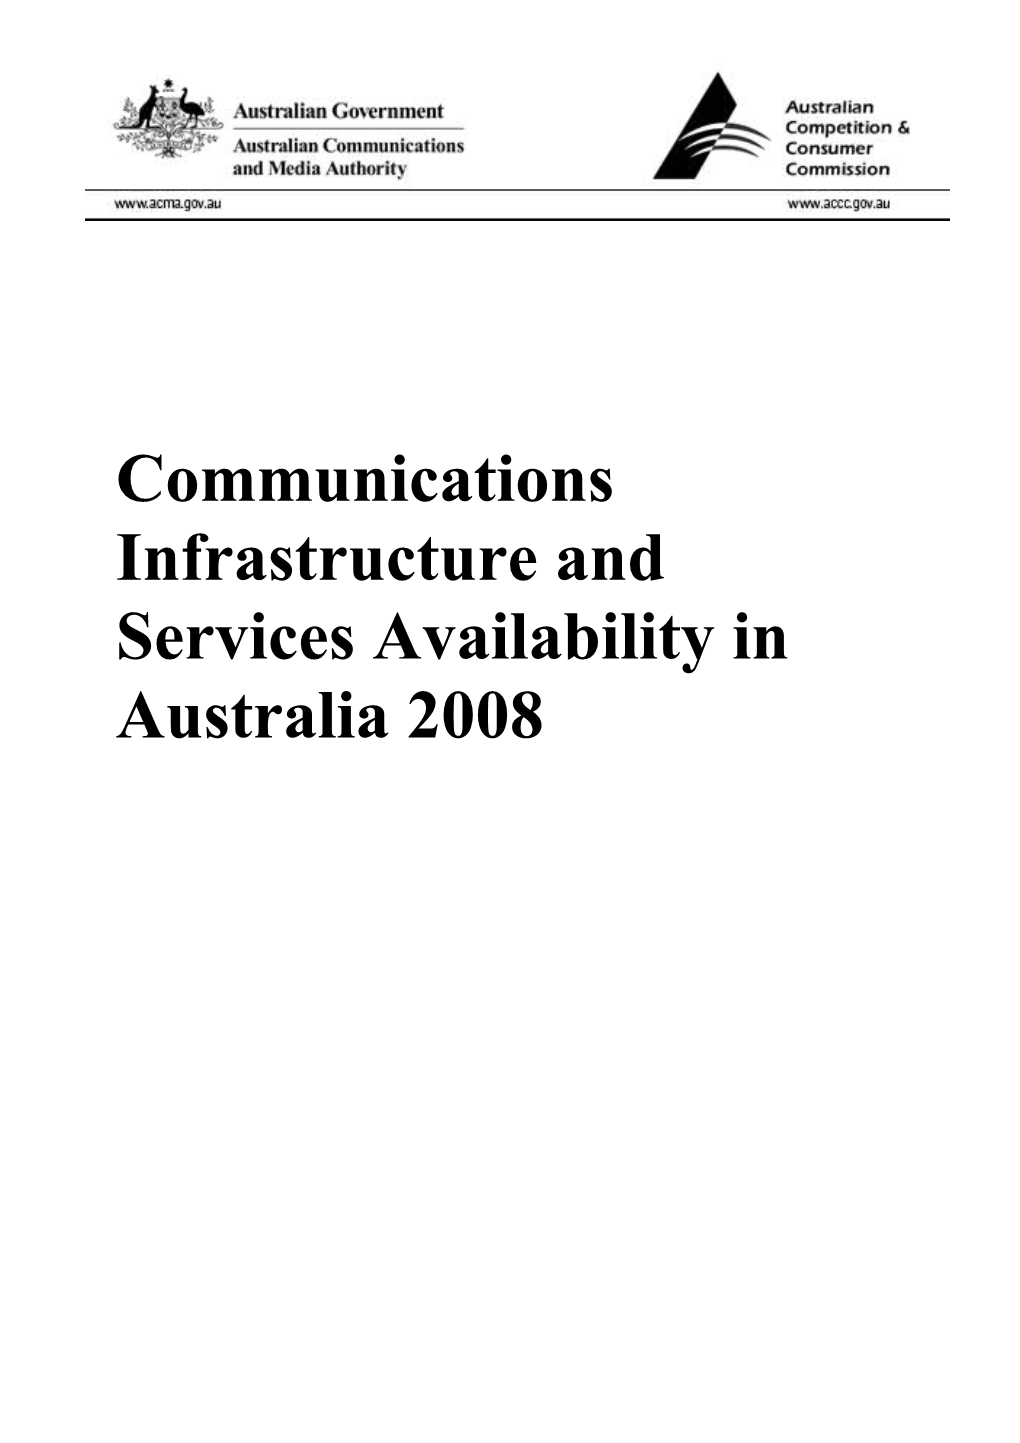 ACMA and ACCC Joint Report on Telecommunications Infrastructure and Service Availability